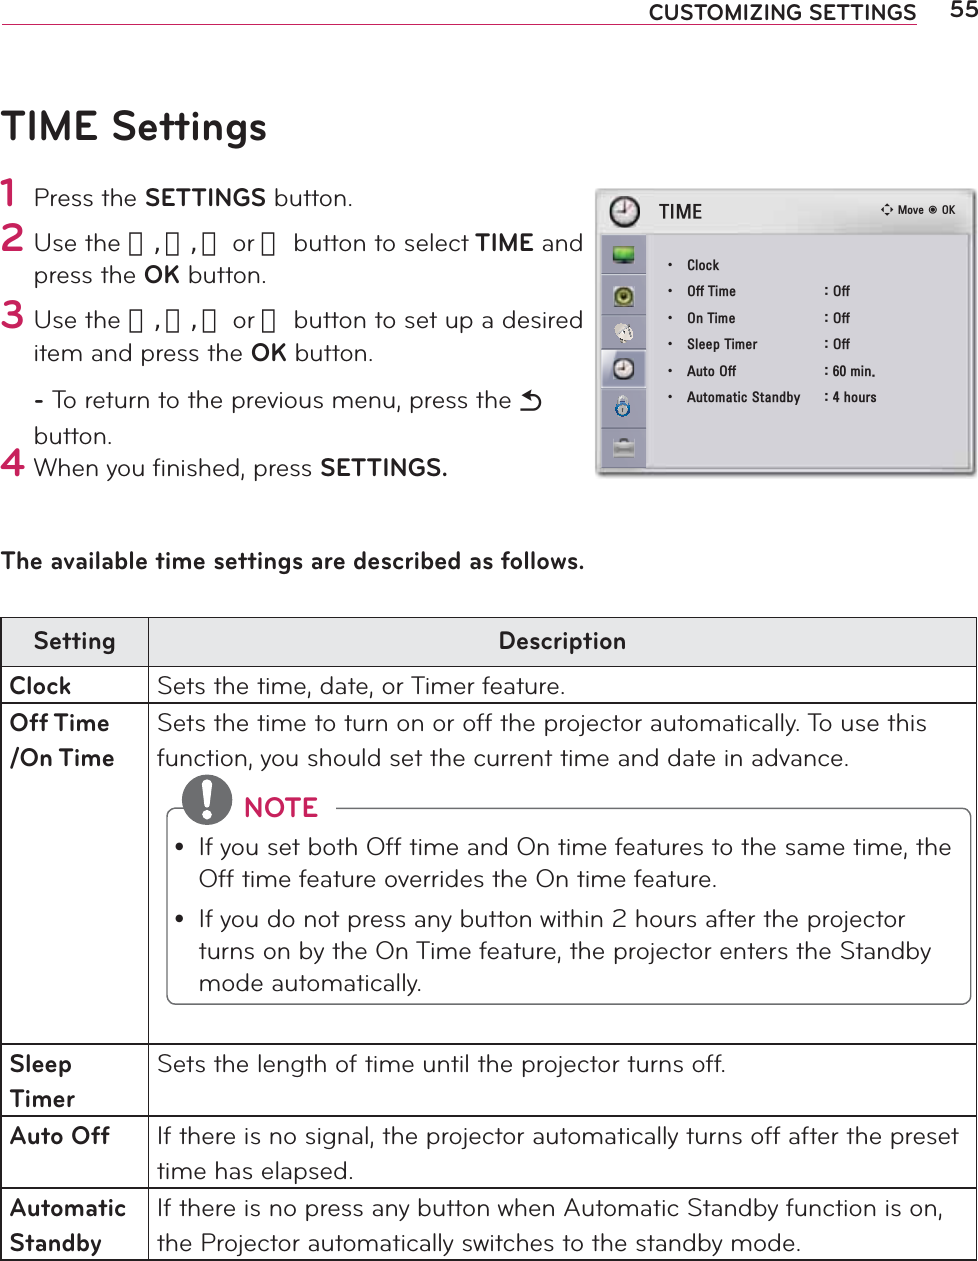 55CUSTOMIZING SETTINGSTIME Settings1 Press the SETTINGS button.2 Use the 󱛨, 󱛩, 󱛦 or 󱛧 button to select TIME and press the OK button.3 Use the 󱛨, 󱛩, 󱛦 or 󱛧 button to set up a desired item and press the OK button.- To return to the previous menu, press the ᰳ button.4 When you ﬁnished, press SETTINGS.The available time settings are described as follows.Setting DescriptionClock Sets the time, date, or Timer feature.Off Time/On TimeSets the time to turn on or off the projector automatically. To use this function, you should set the current time and date in advance. NOTEy If you set both Off time and On time features to the same time, the Off time feature overrides the On time feature.y If you do not press any button within 2 hours after the projector turns on by the On Time feature, the projector enters the Standby mode automatically.Sleep TimerSets the length of time until the projector turns off. Auto Off If there is no signal, the projector automatically turns off after the preset time has elapsed.Automatic StandbyIf there is no press any button when Automatic Standby function is on, the Projector automatically switches to the standby mode.ᯒ0RYHᯙ2.7,0(ؒ &amp;ORFNؒ 2II7LPH 2IIؒ 2Q7LPH 2IIؒ 6OHHS7LPHU 2IIؒ $XWR2II PLQؒ $XWRPDWLF6WDQGE\ KRXUV